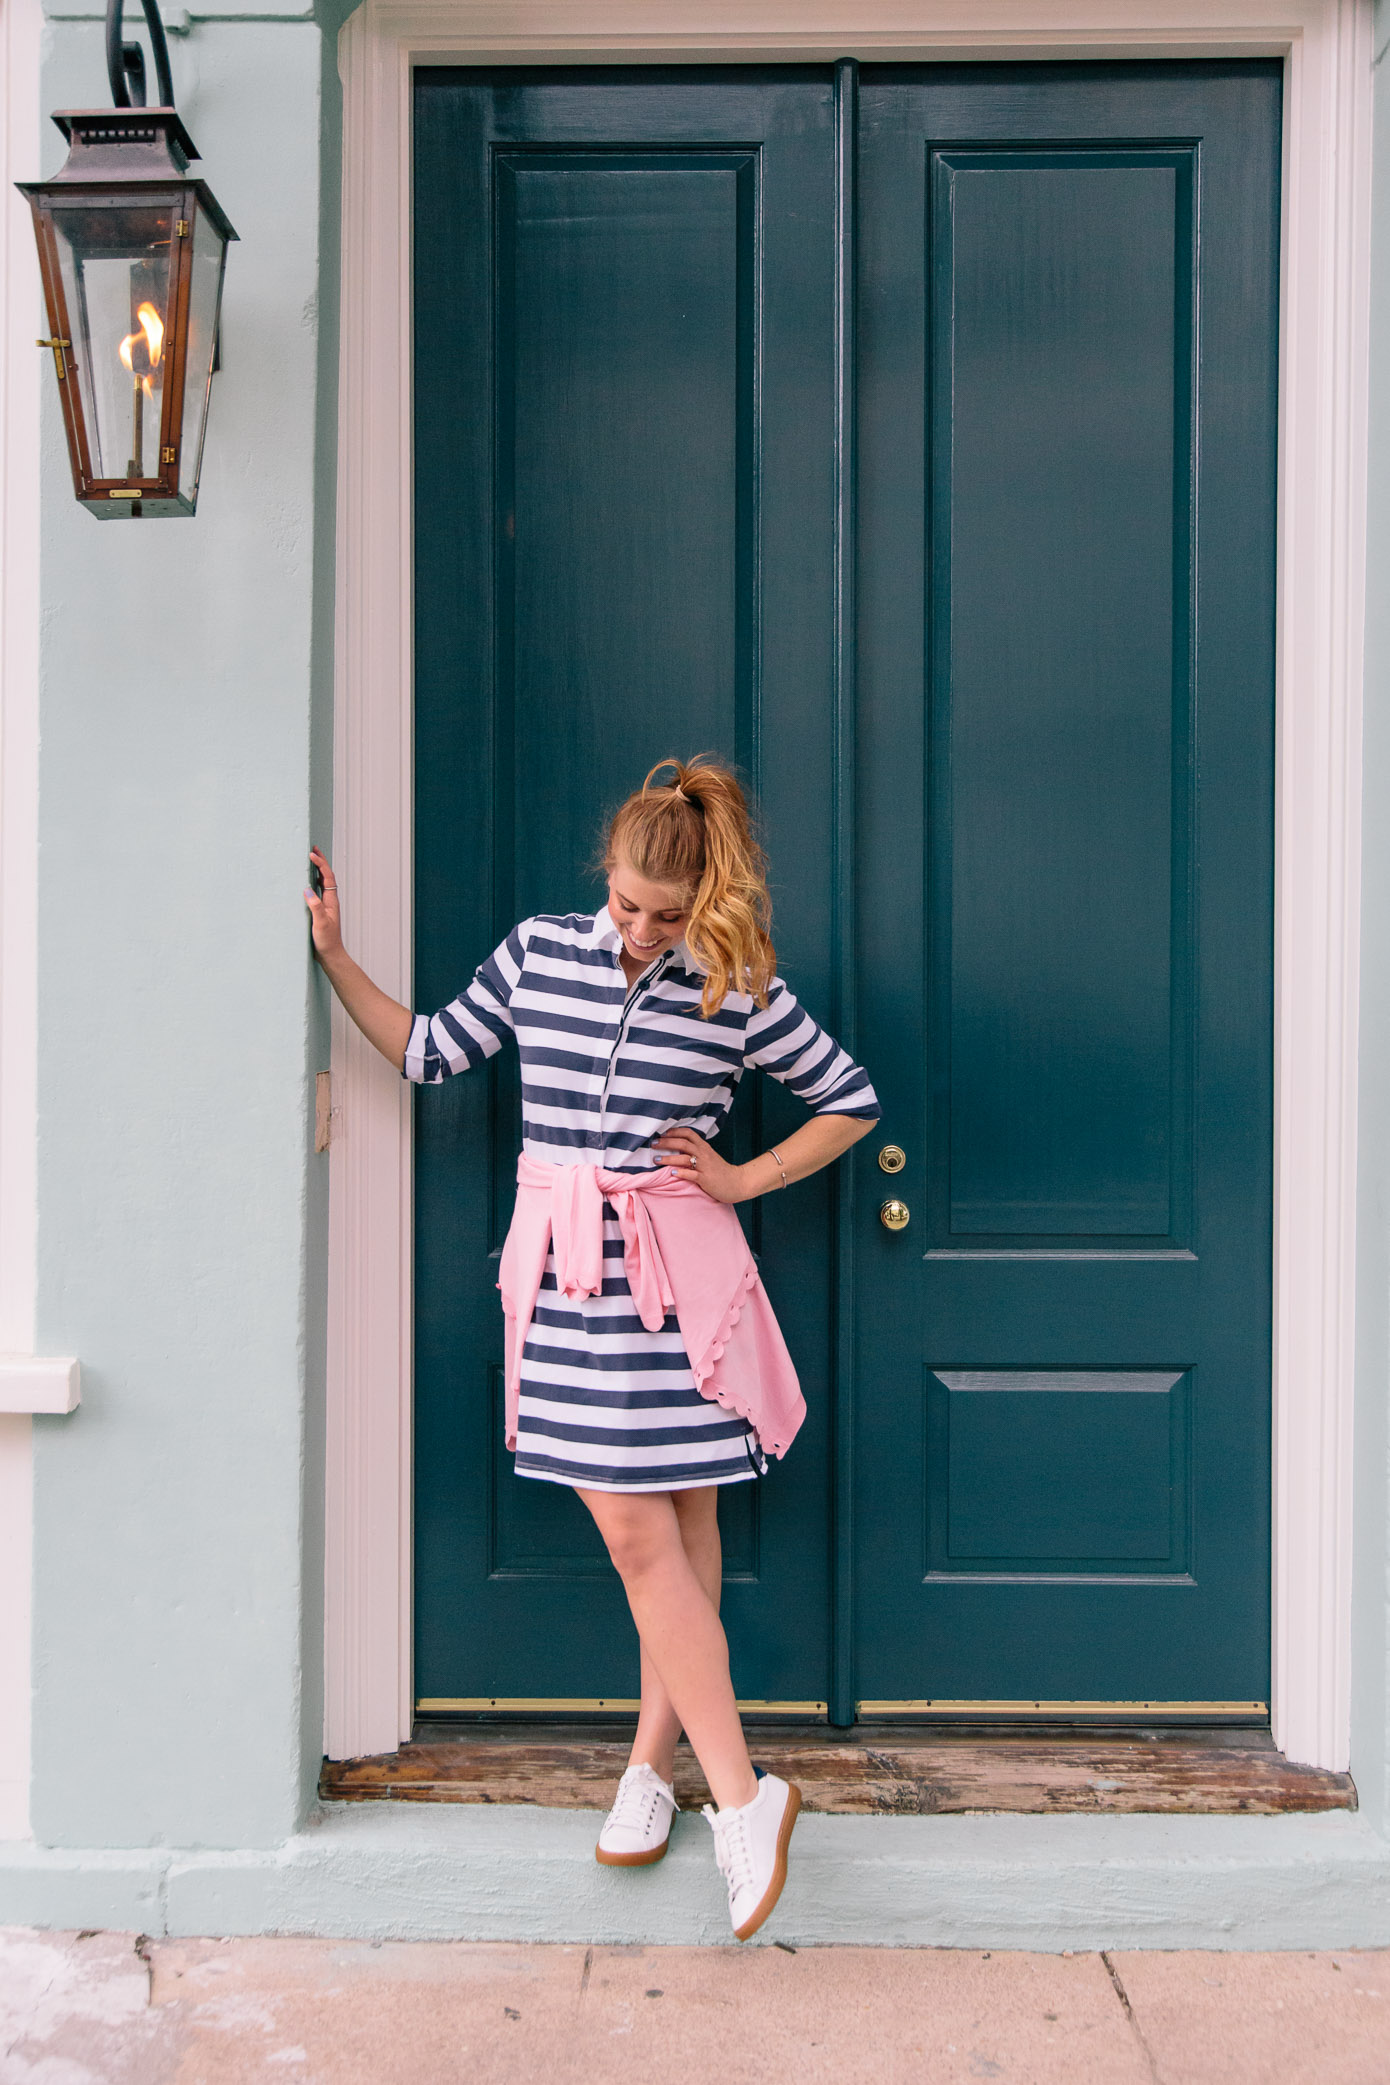 Striped Rugby Dress | Casual Spring to Summer Style | Louella Reese Life & Style Blog